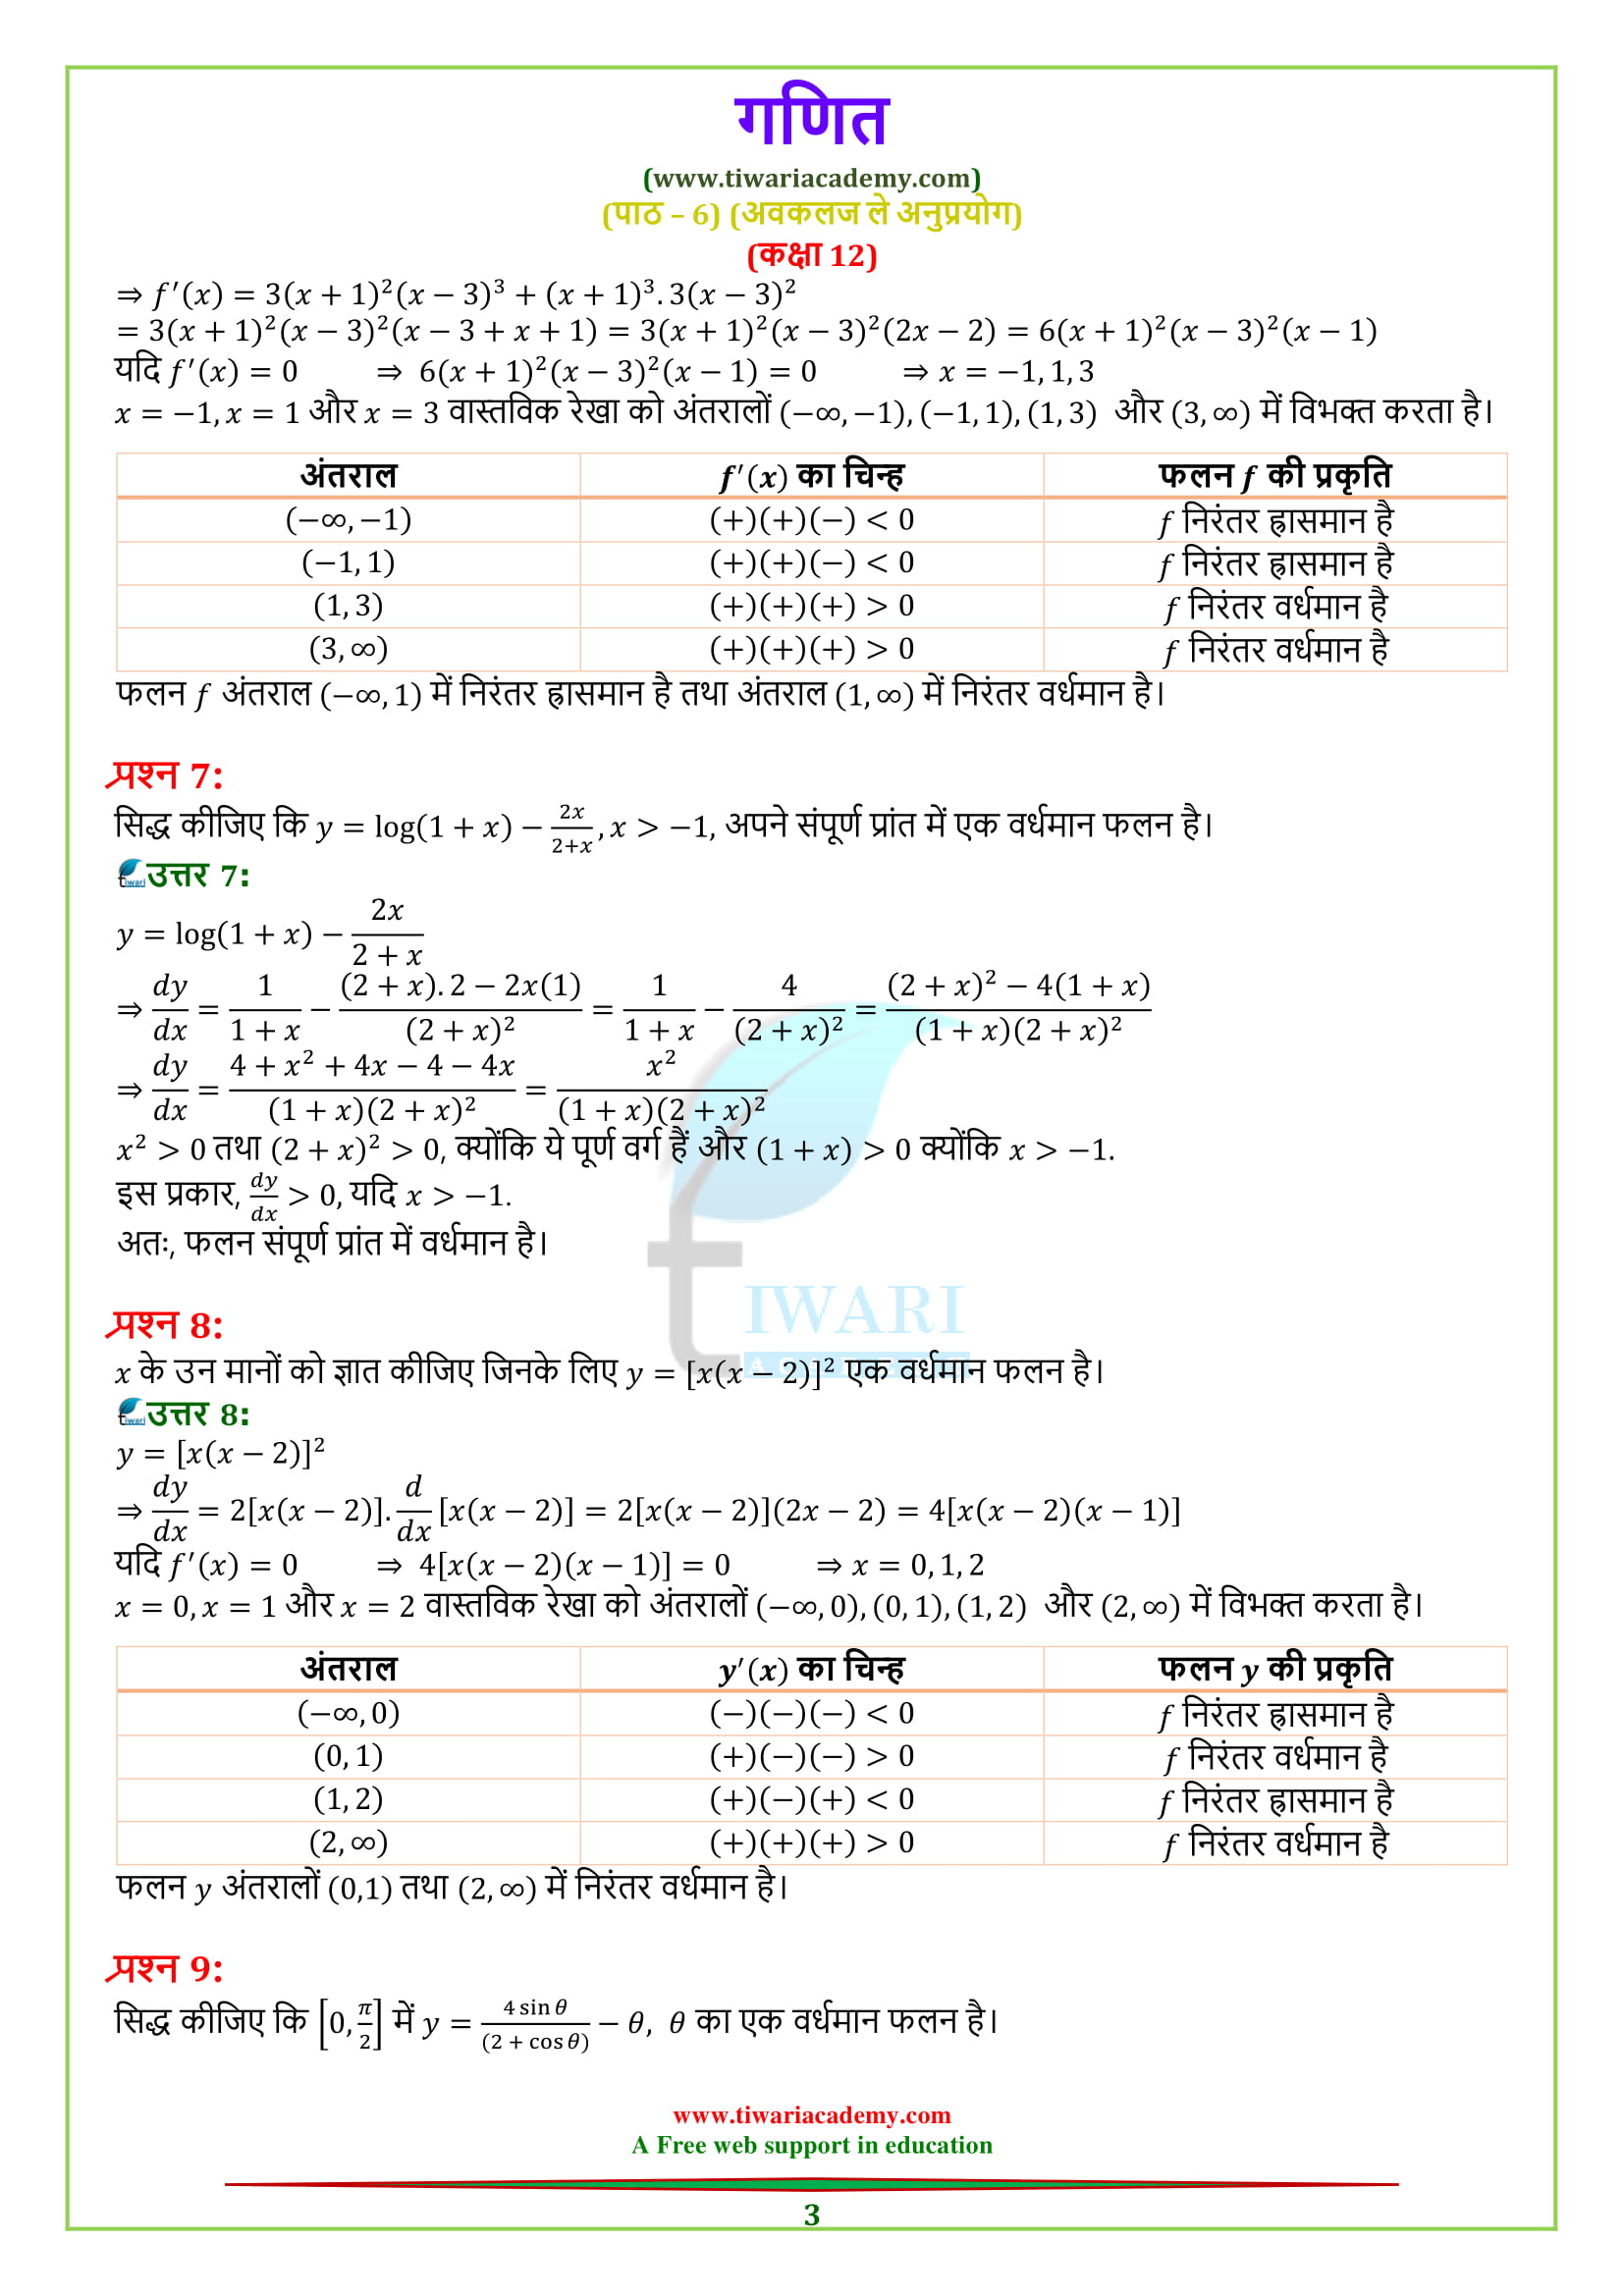 NCERT Solutions for Class 12 Maths Chapter 6 Exercise 6.2 updated for 2018-19 exams.